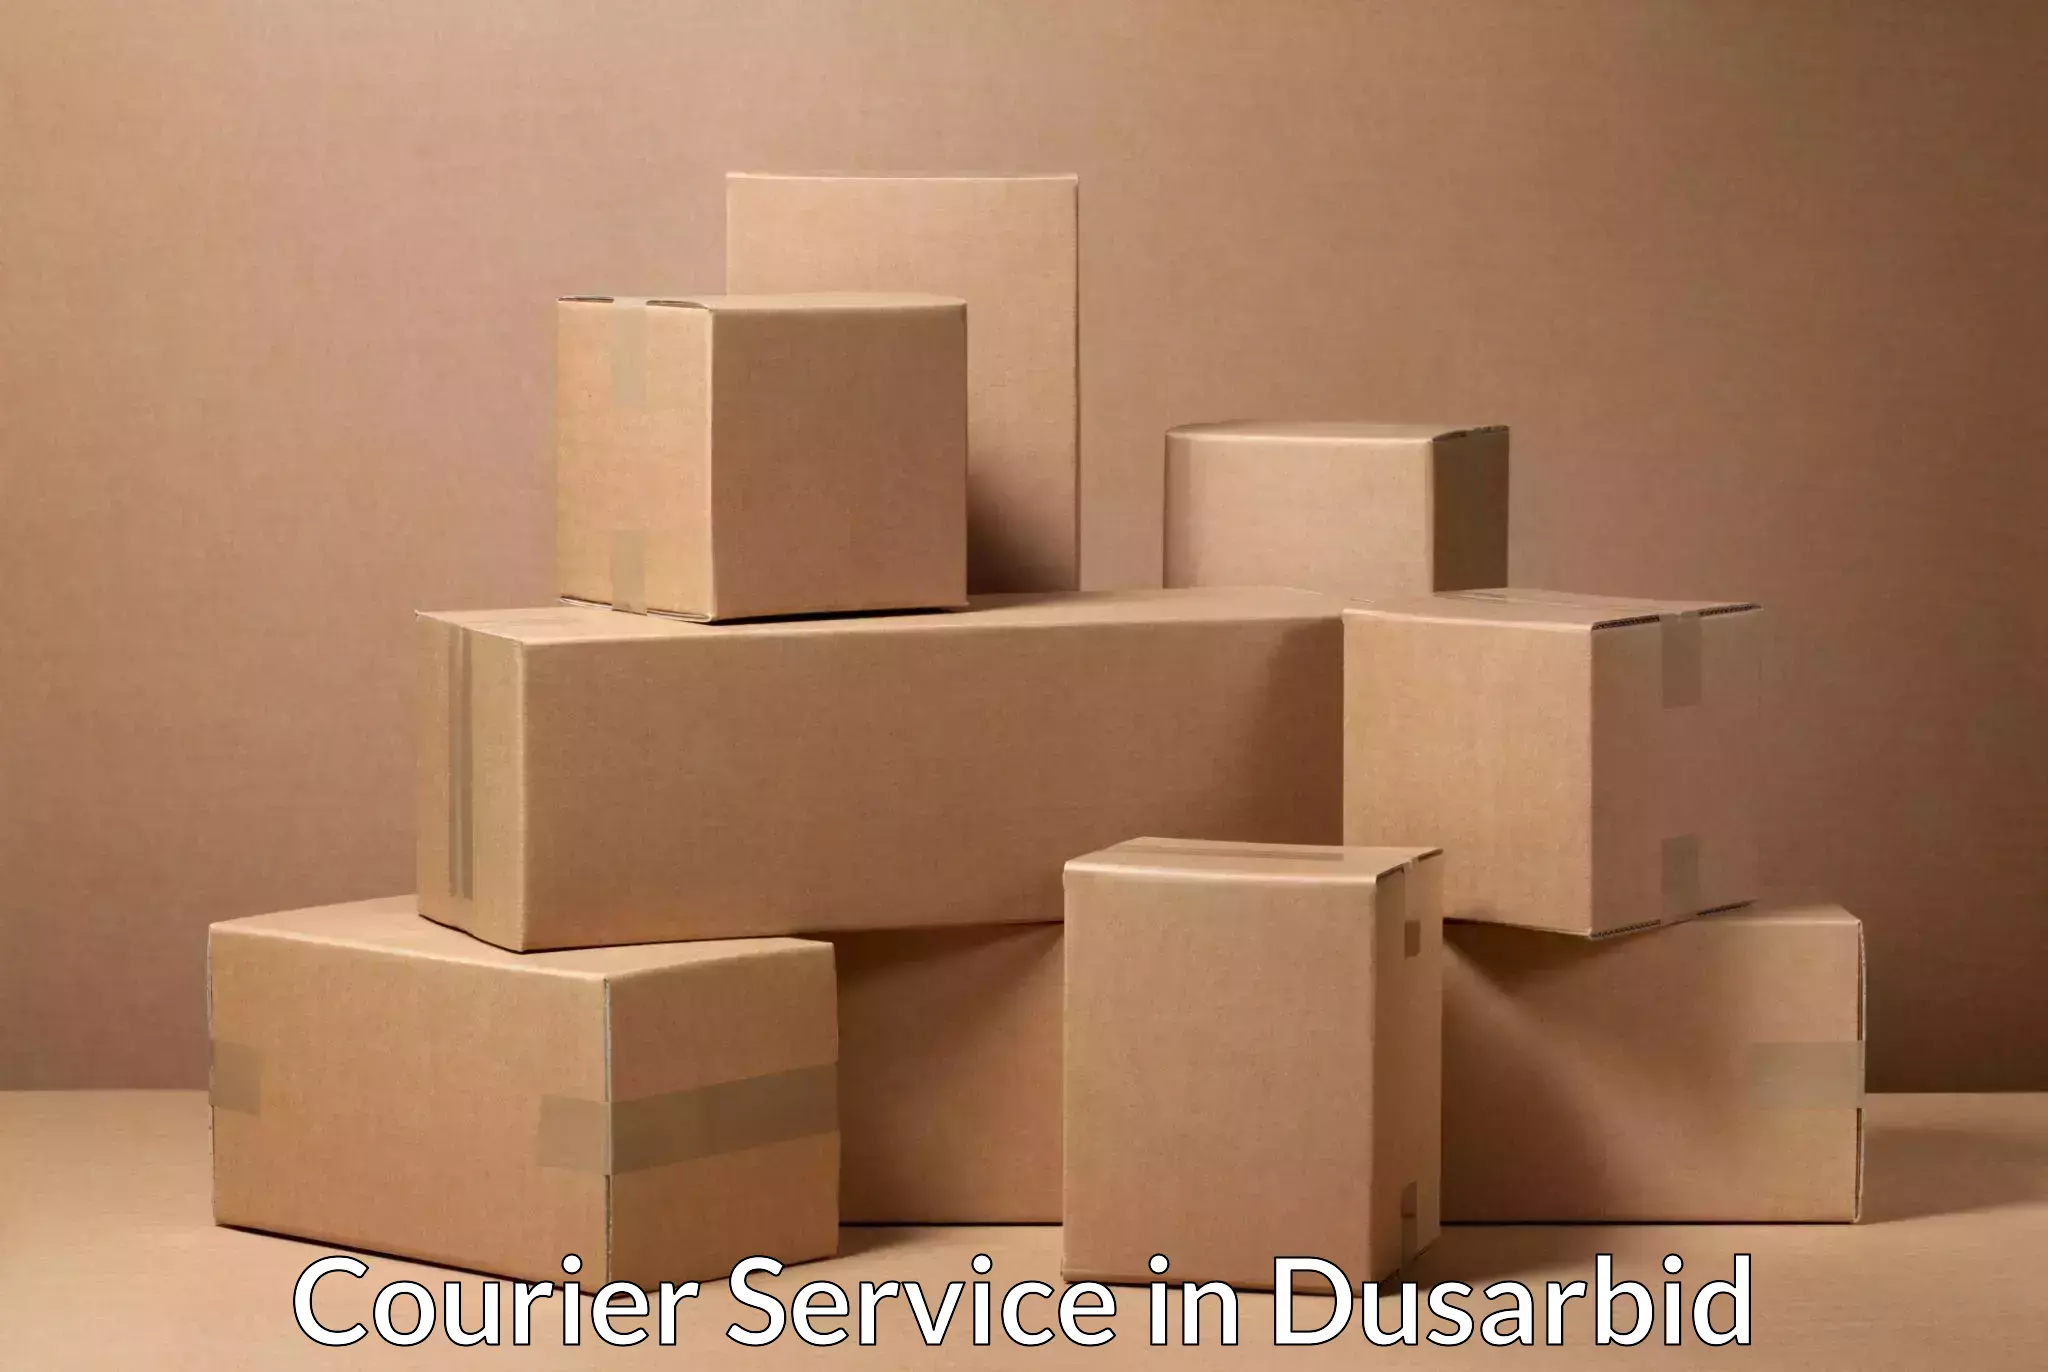 Nationwide shipping coverage in Dusarbid